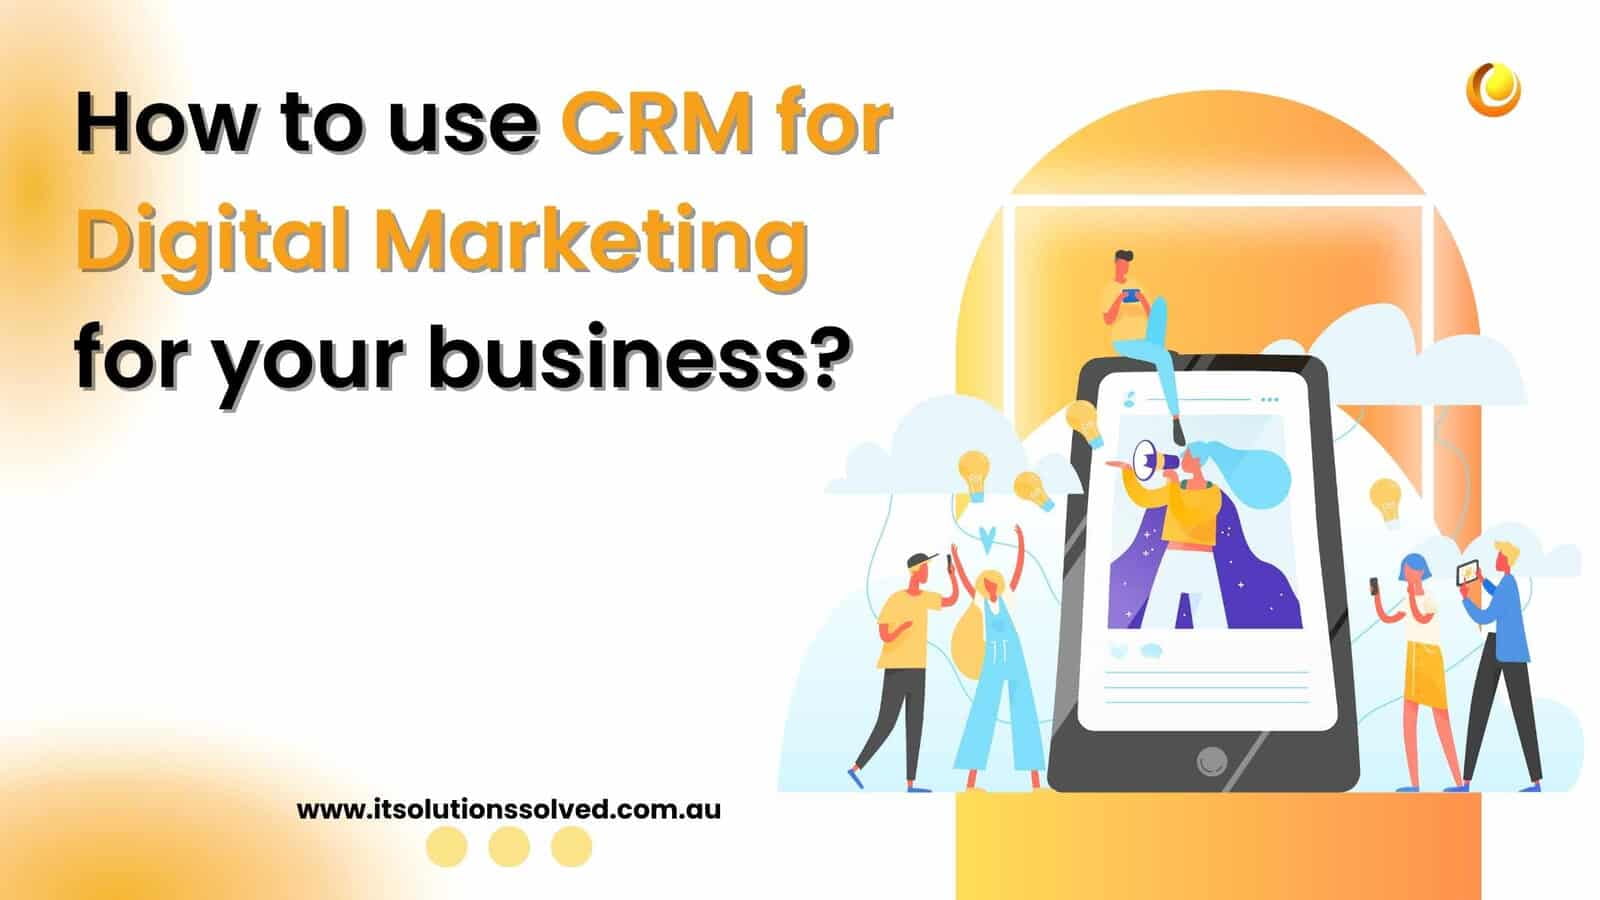 How to use CRM for Digital Marketing in your business?